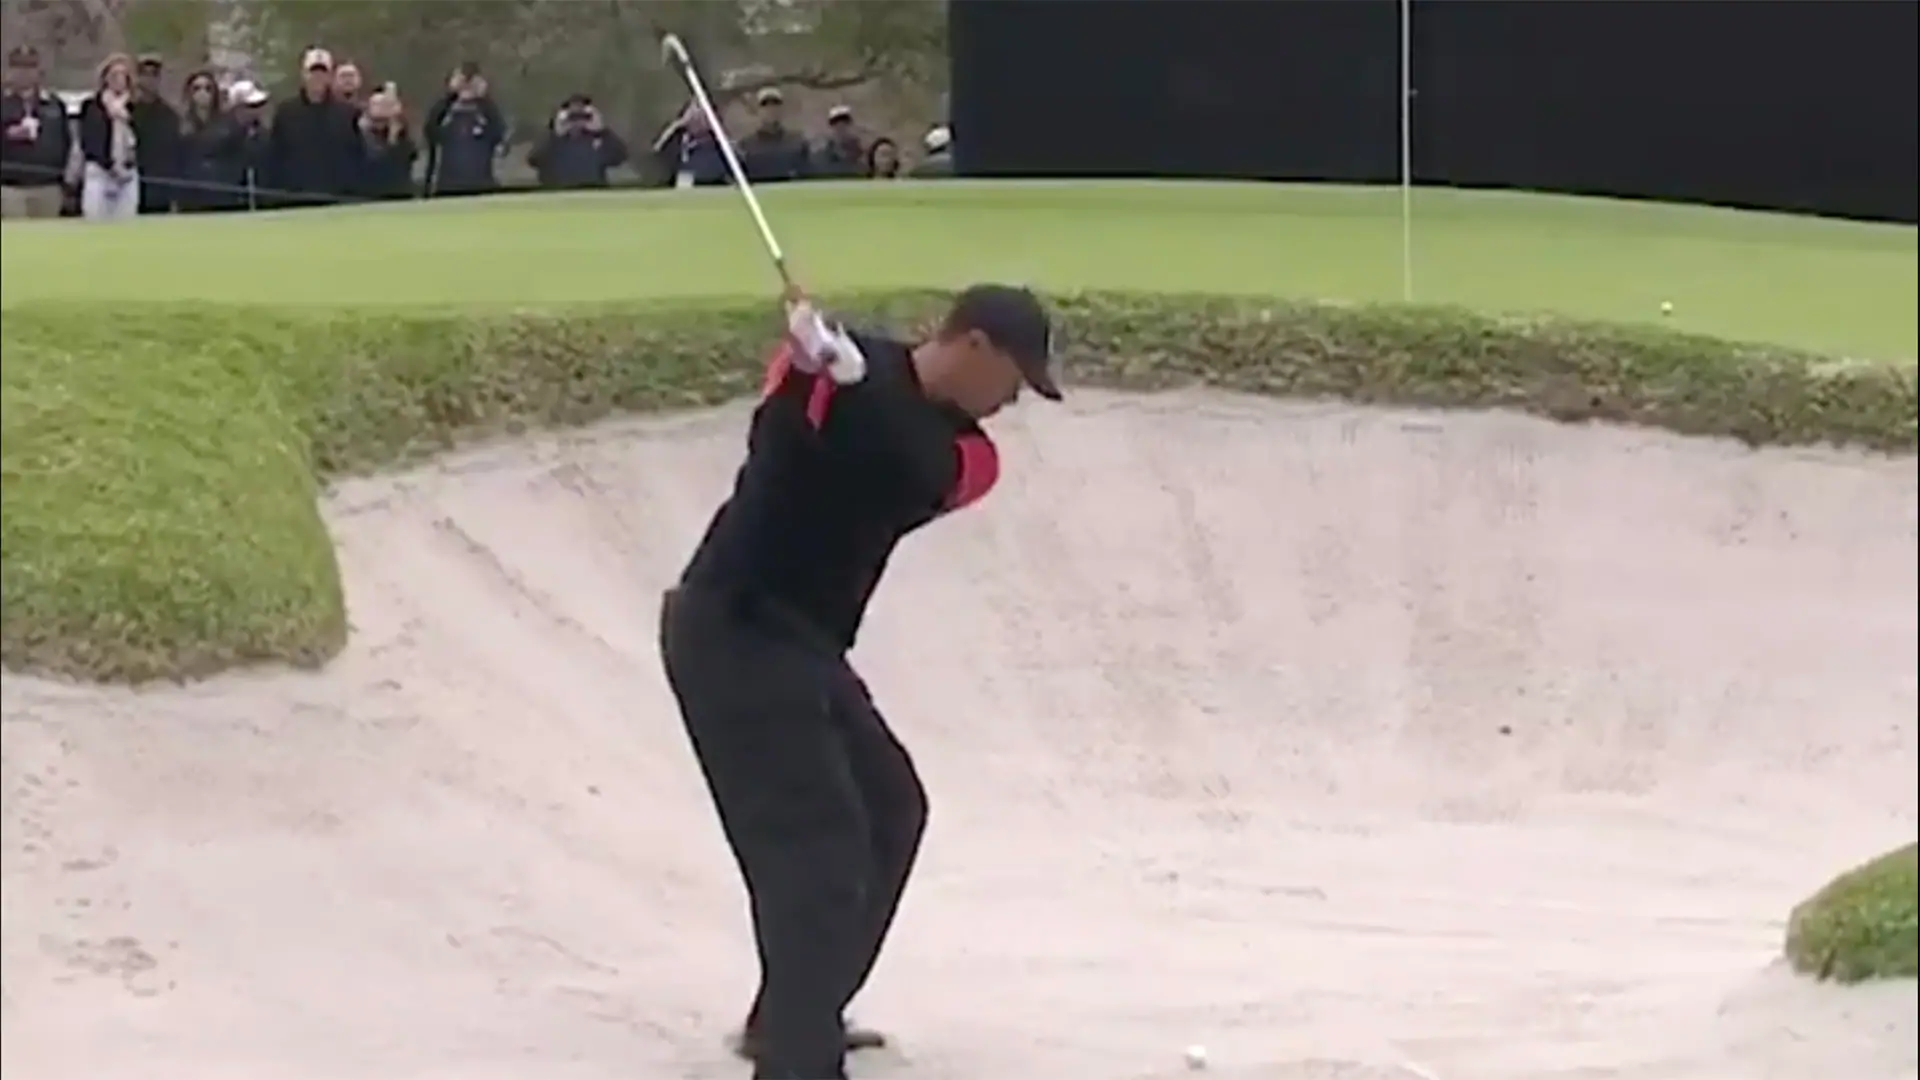 Highlights: Tiger's final round includes holeout from bunker